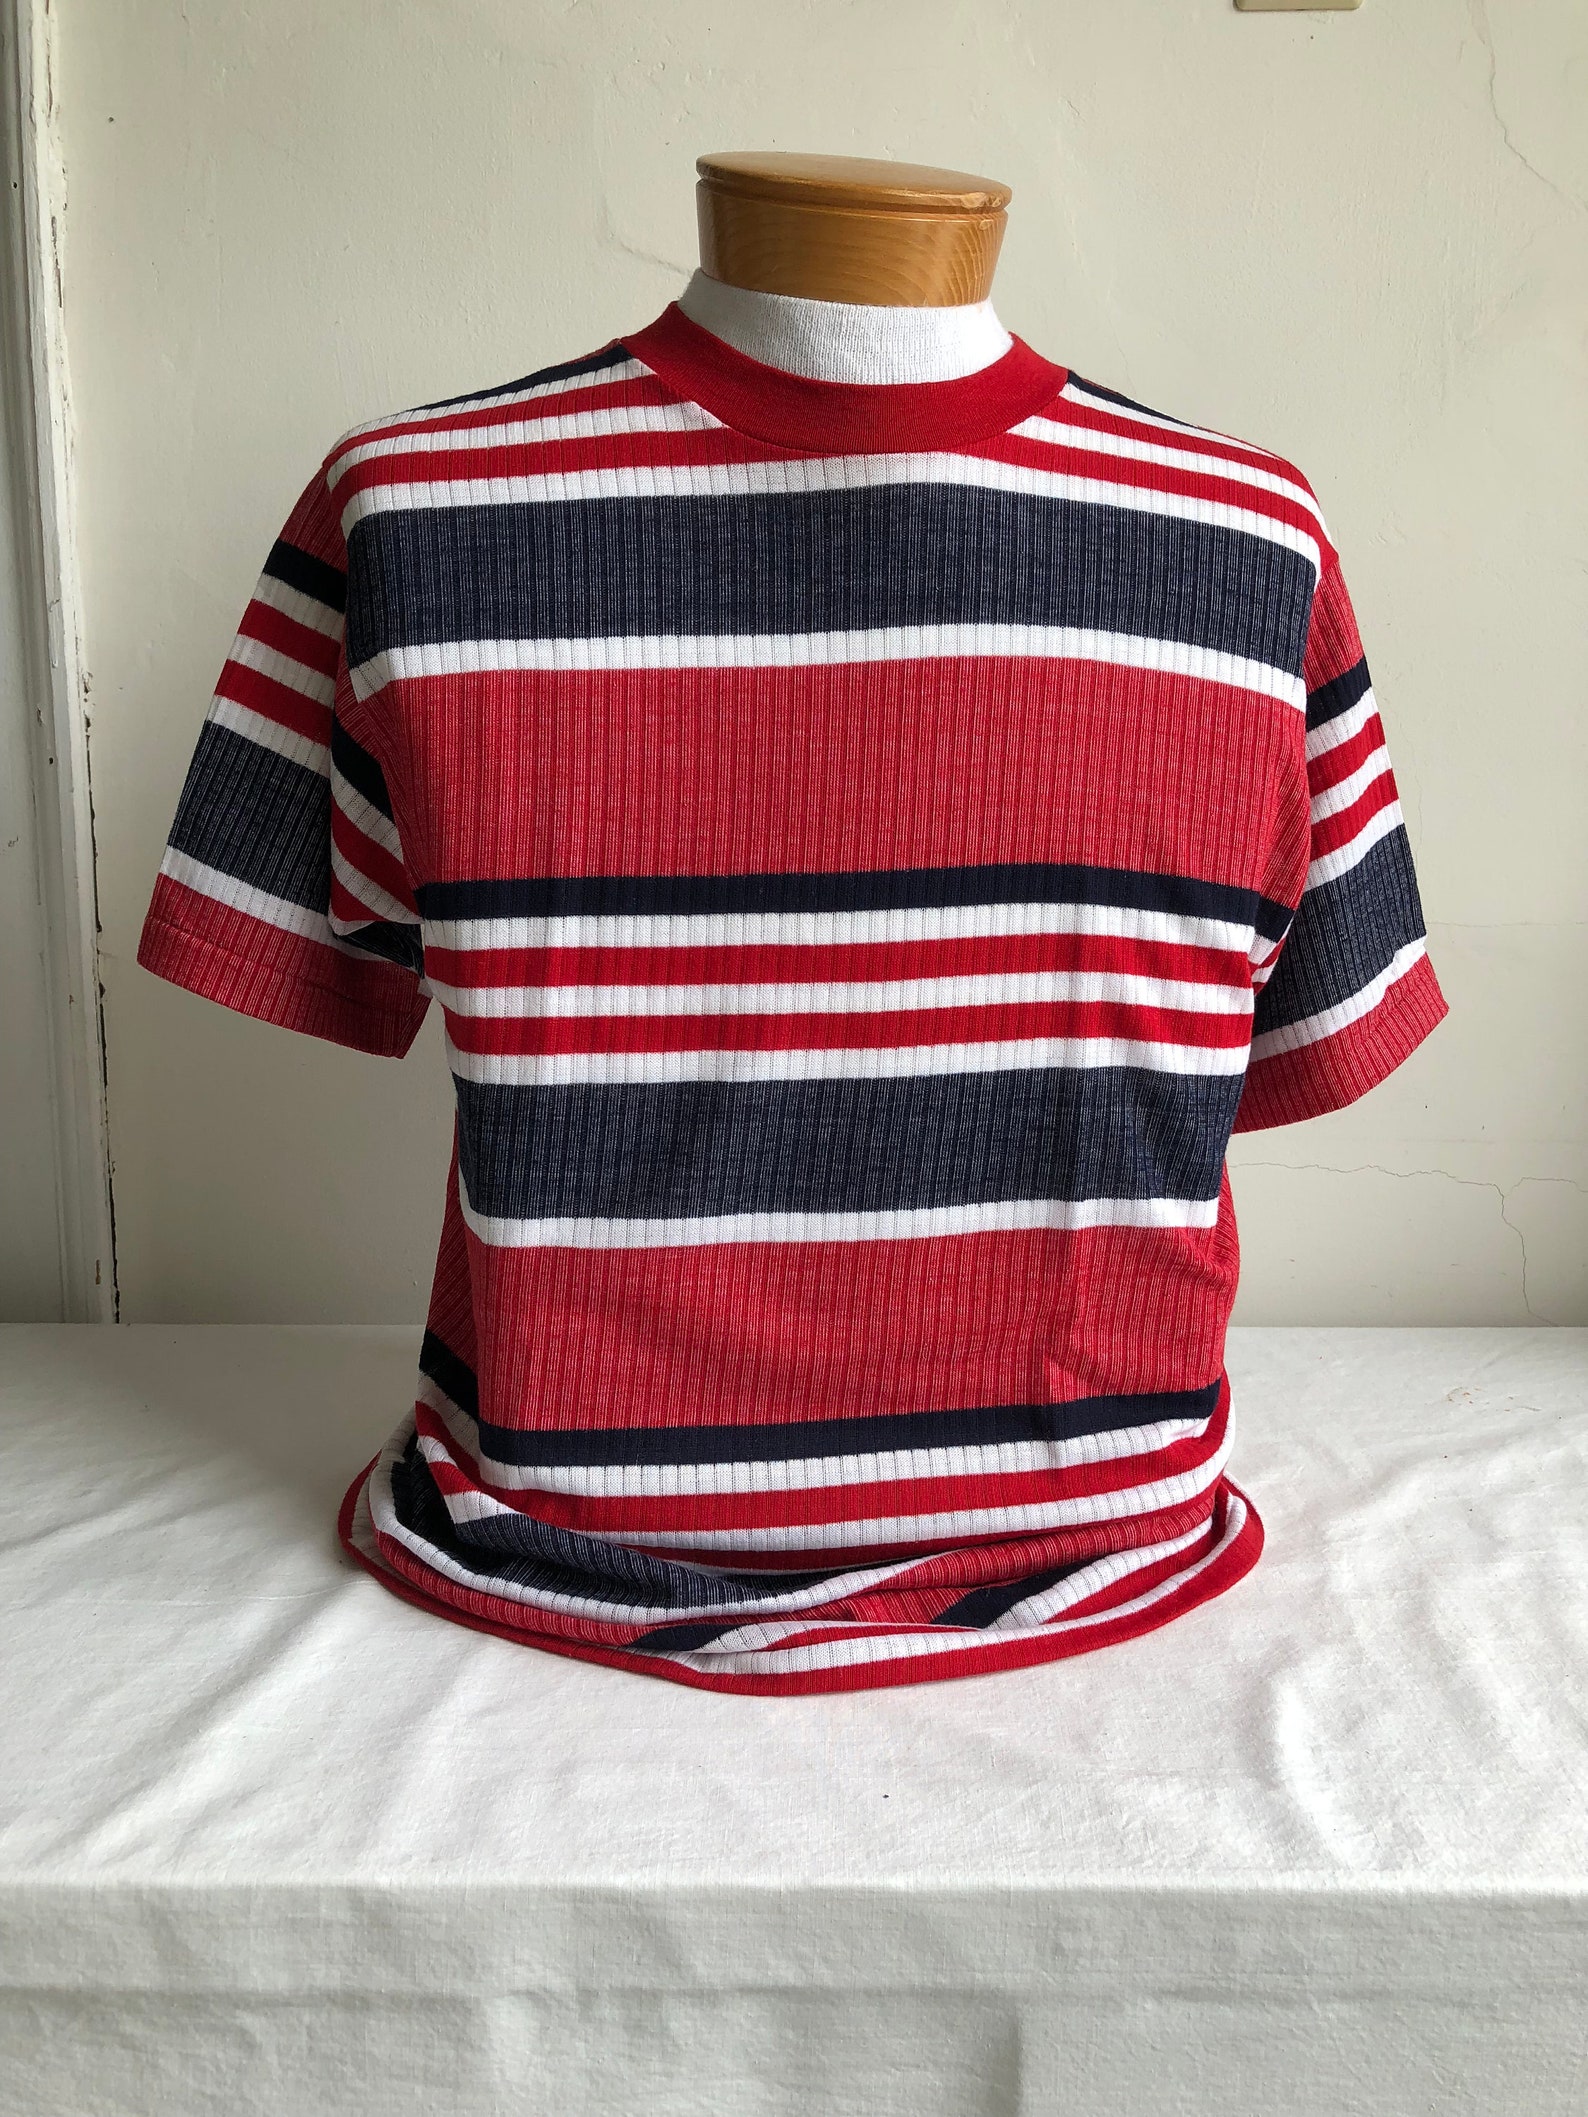 1960s Surfer Striped Ribbed Tee Surf Shirt Campus Short Sleeve - Etsy